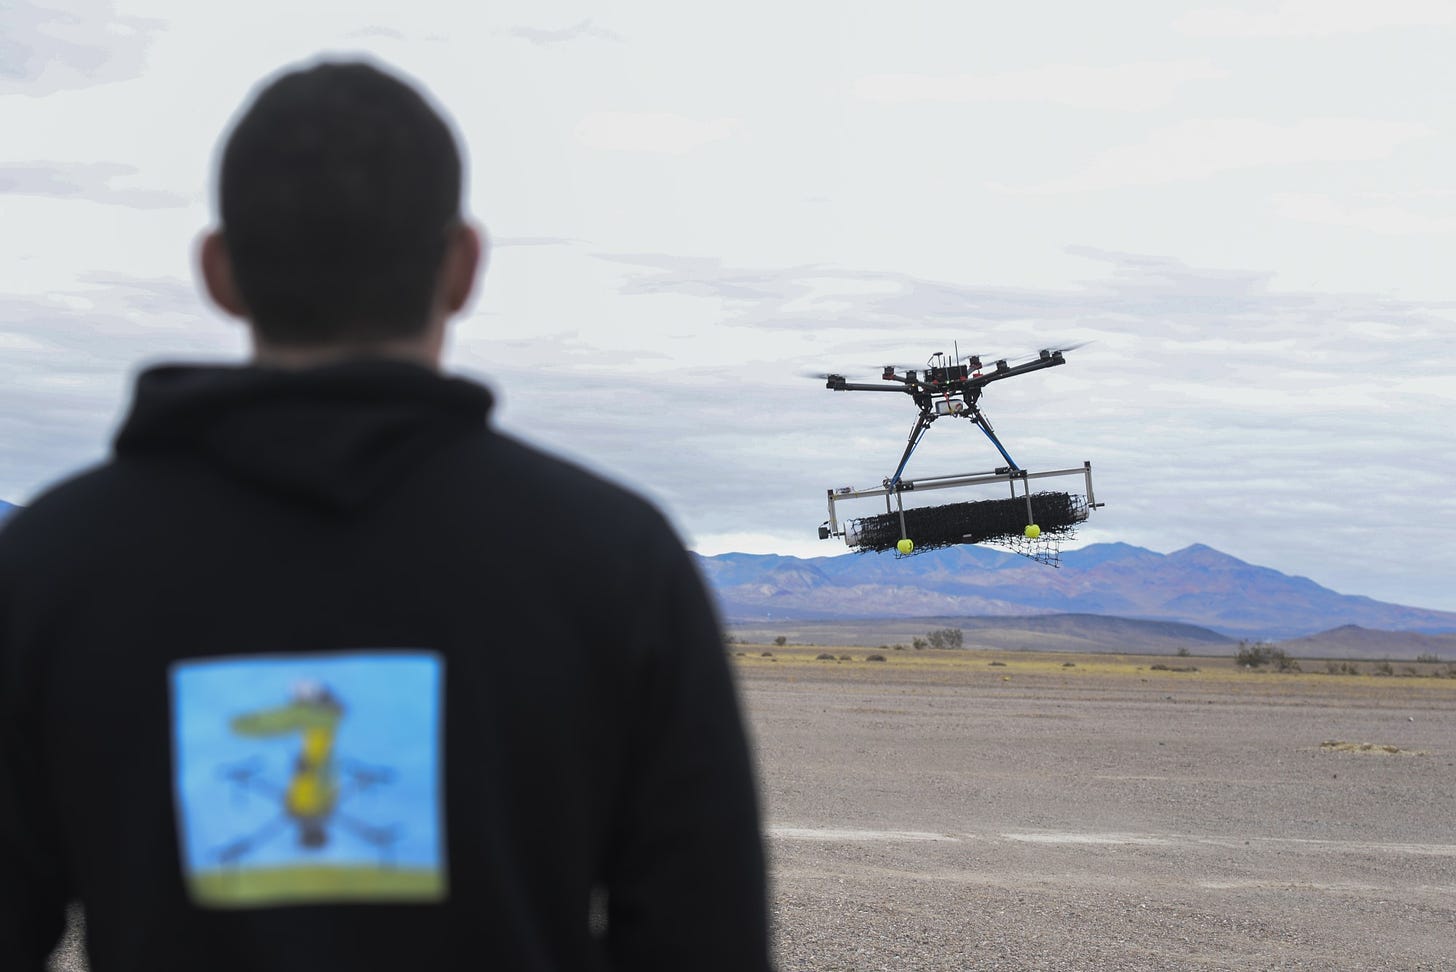 U.S. Air Force 2nd Lt. David Feibus, from Wright-Patterson Air Force Base, Ohio, fly's one his teams DJI S1000 drone during the setup and calibration phase of the event at the Nevada National Security Site, Las Vegas, NV., Dec. 9, 2016. This year teams were given the challenge of solving issues revolving around drones, and are demonstrating their solutions to judges. 